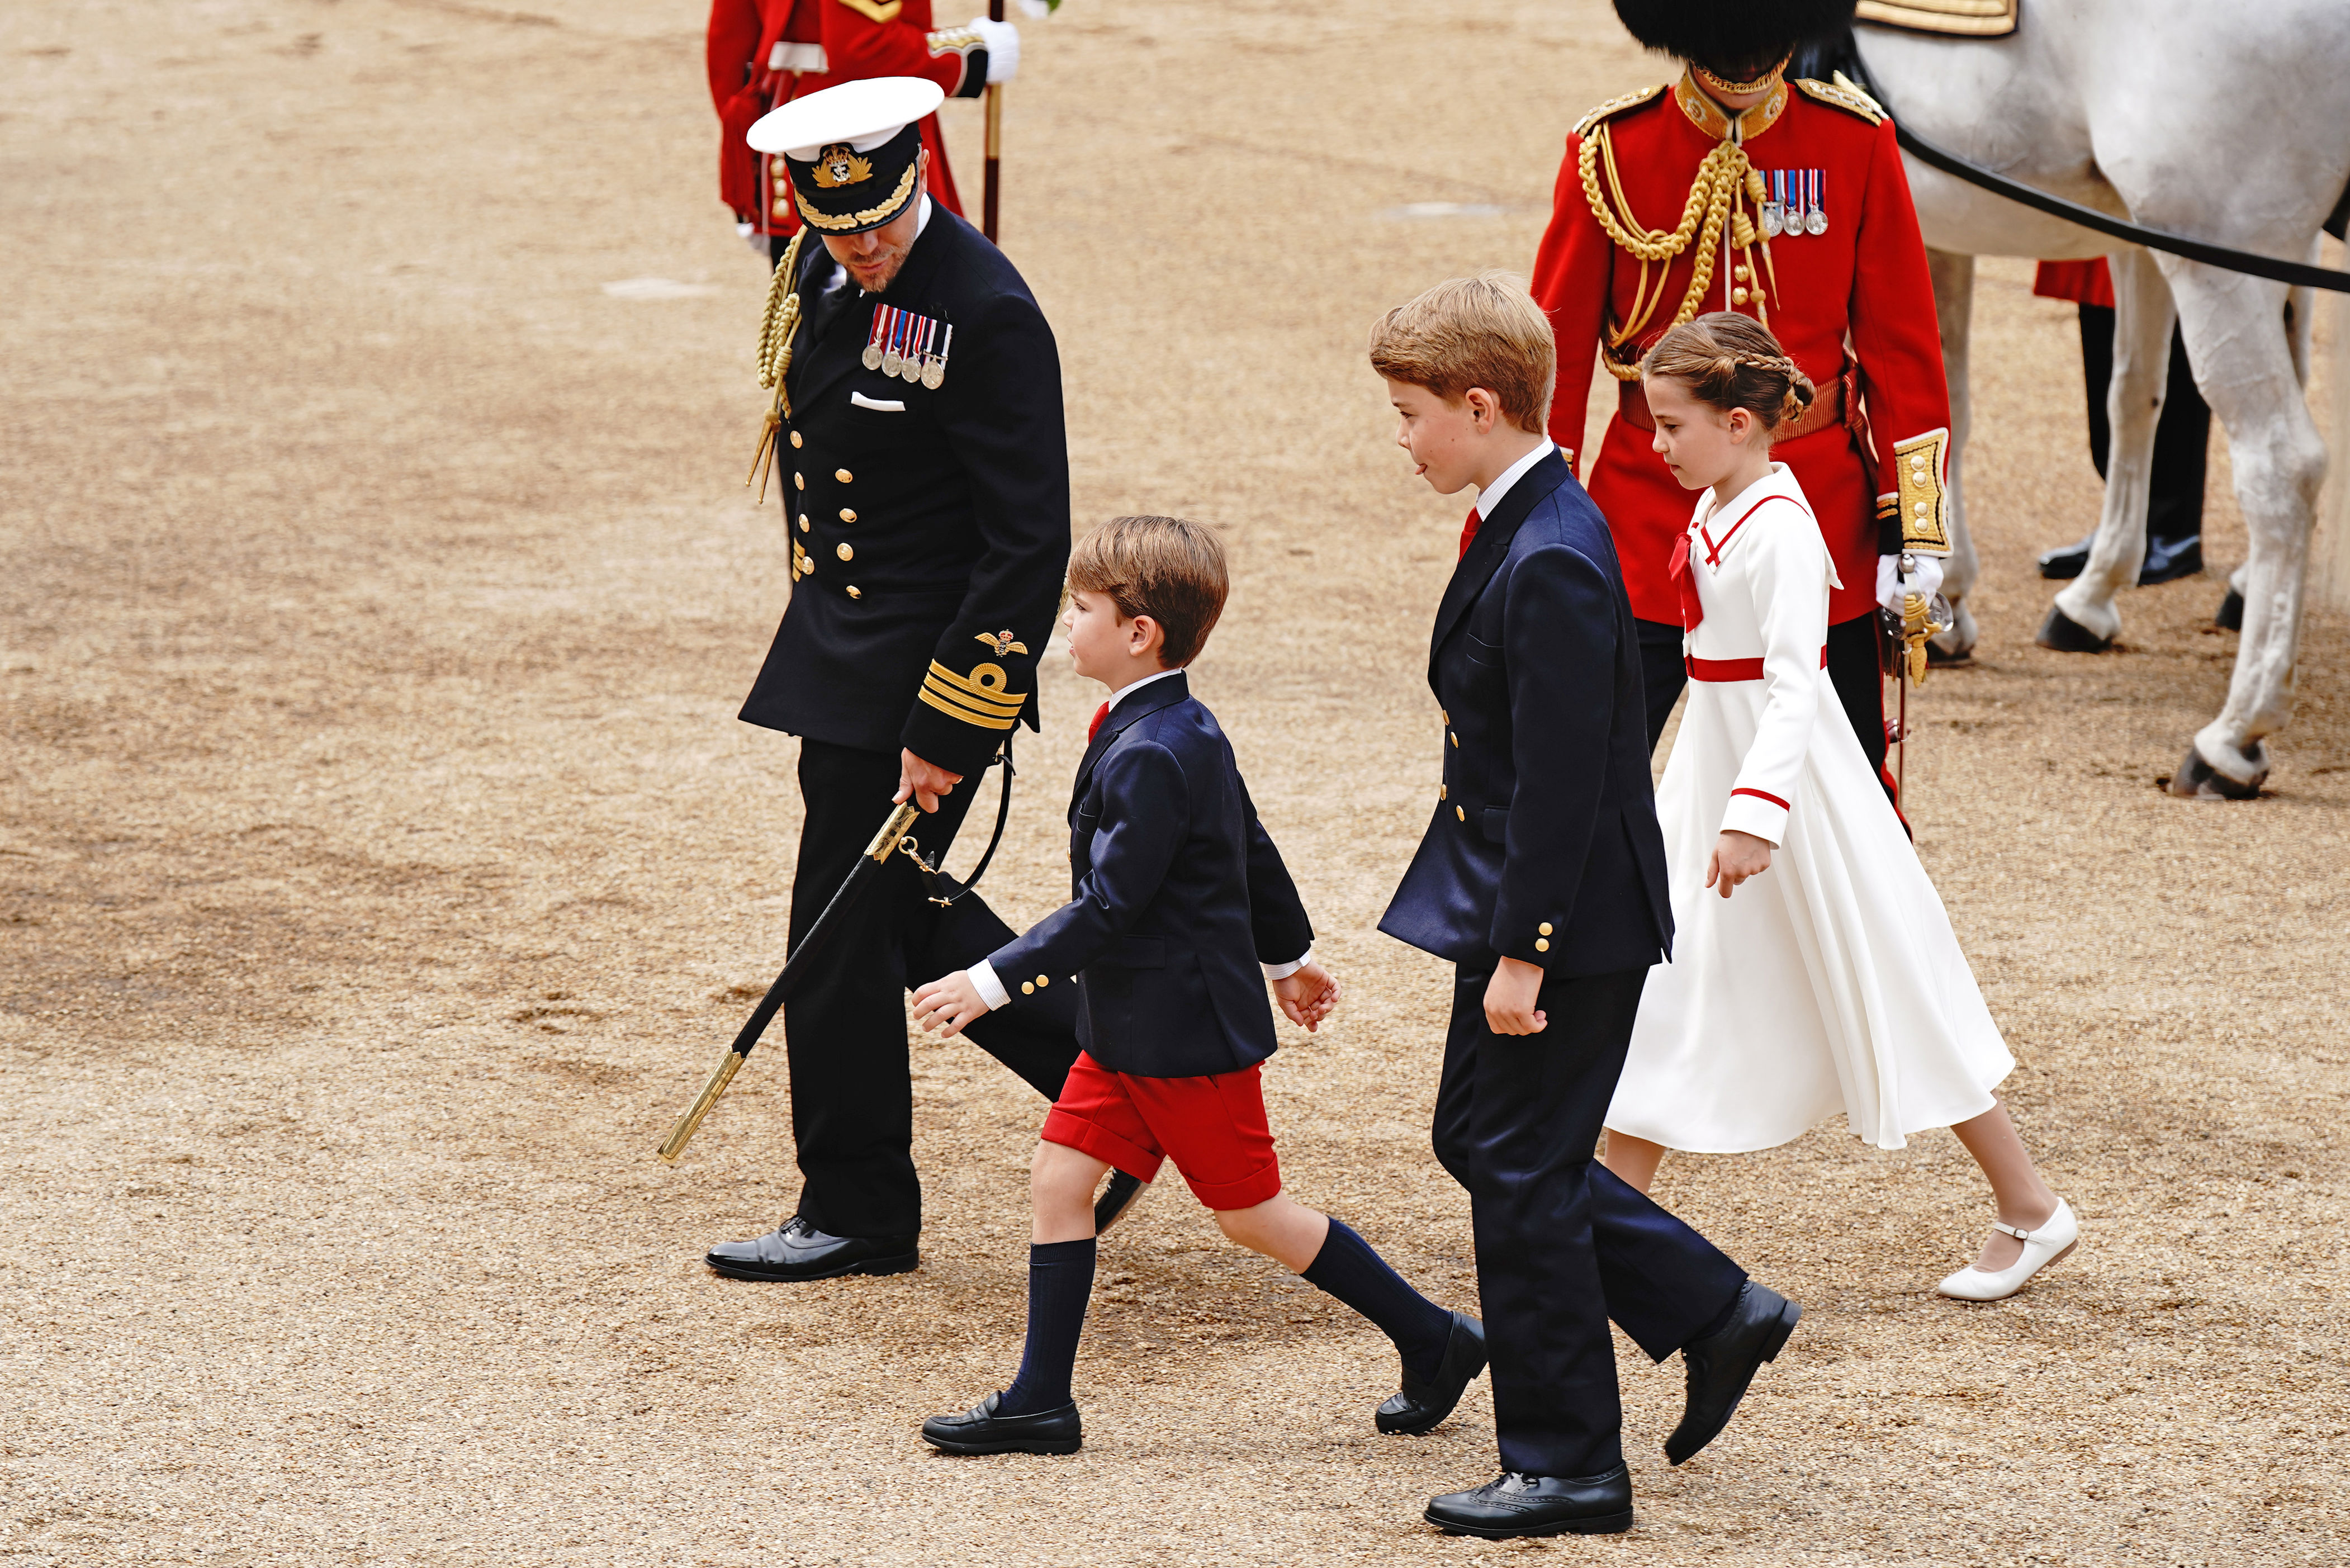 <p>Prince Louis, Prince George and Princess Charlotte headed to their carriage for the <a href="https://www.wonderwall.com/celebrity/royals/trooping-the-colour-2023-king-charles-iii-celebrates-the-first-of-his-reign-752078.gallery">Trooping the Colour</a> ceremony at Horse Guards Parade in London on June 1, 2023.</p>